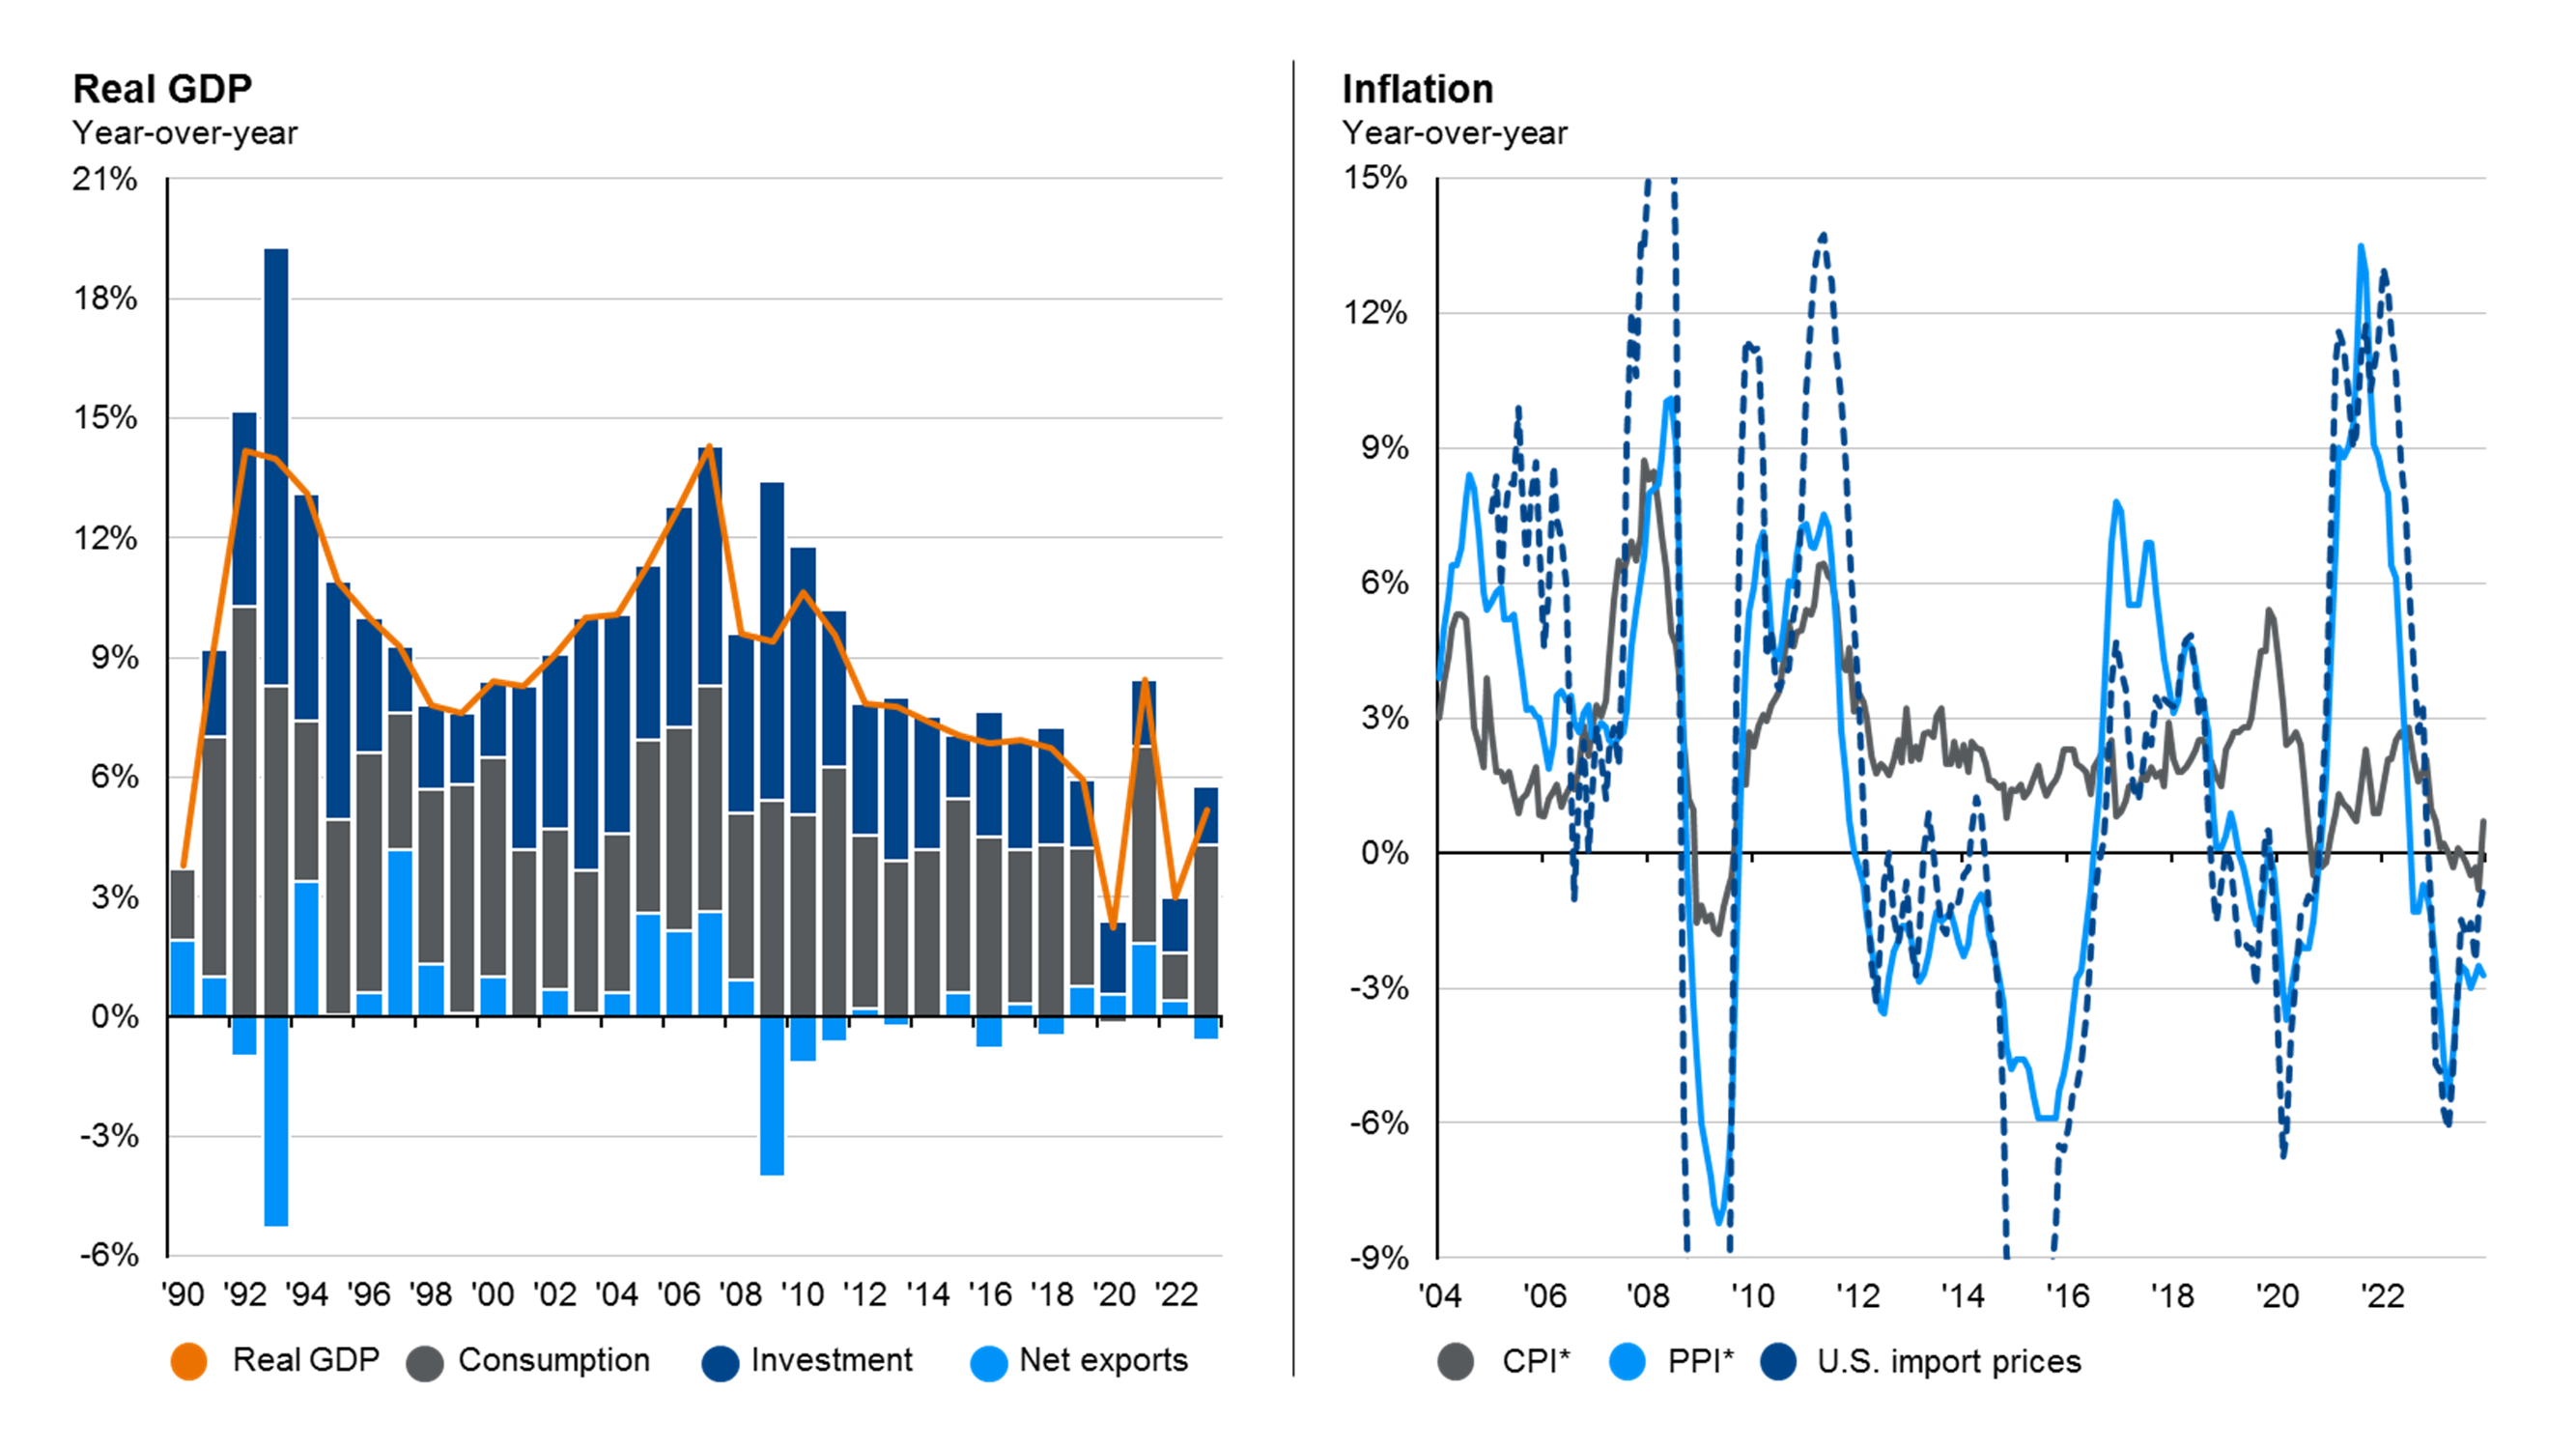 Japan: GDP and inflation